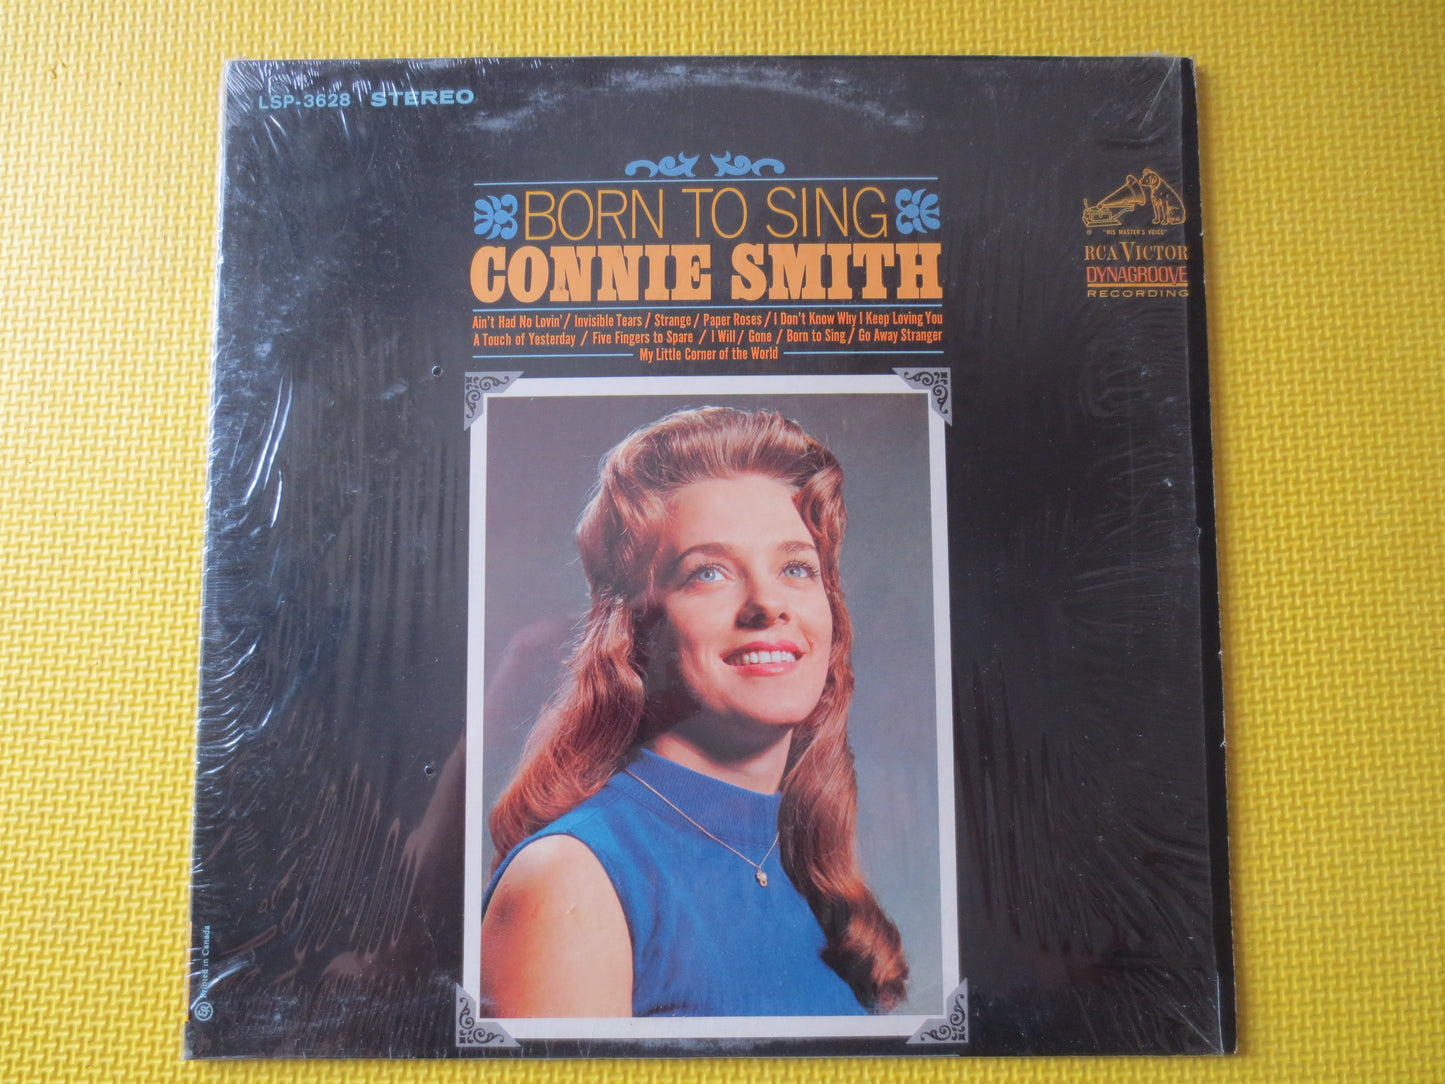 CONNIE SMITH, Born to SING, Connie Smith Records, Connie Smith Albums, Connie Smith Lps, Country Records, Lps, 1966 Records